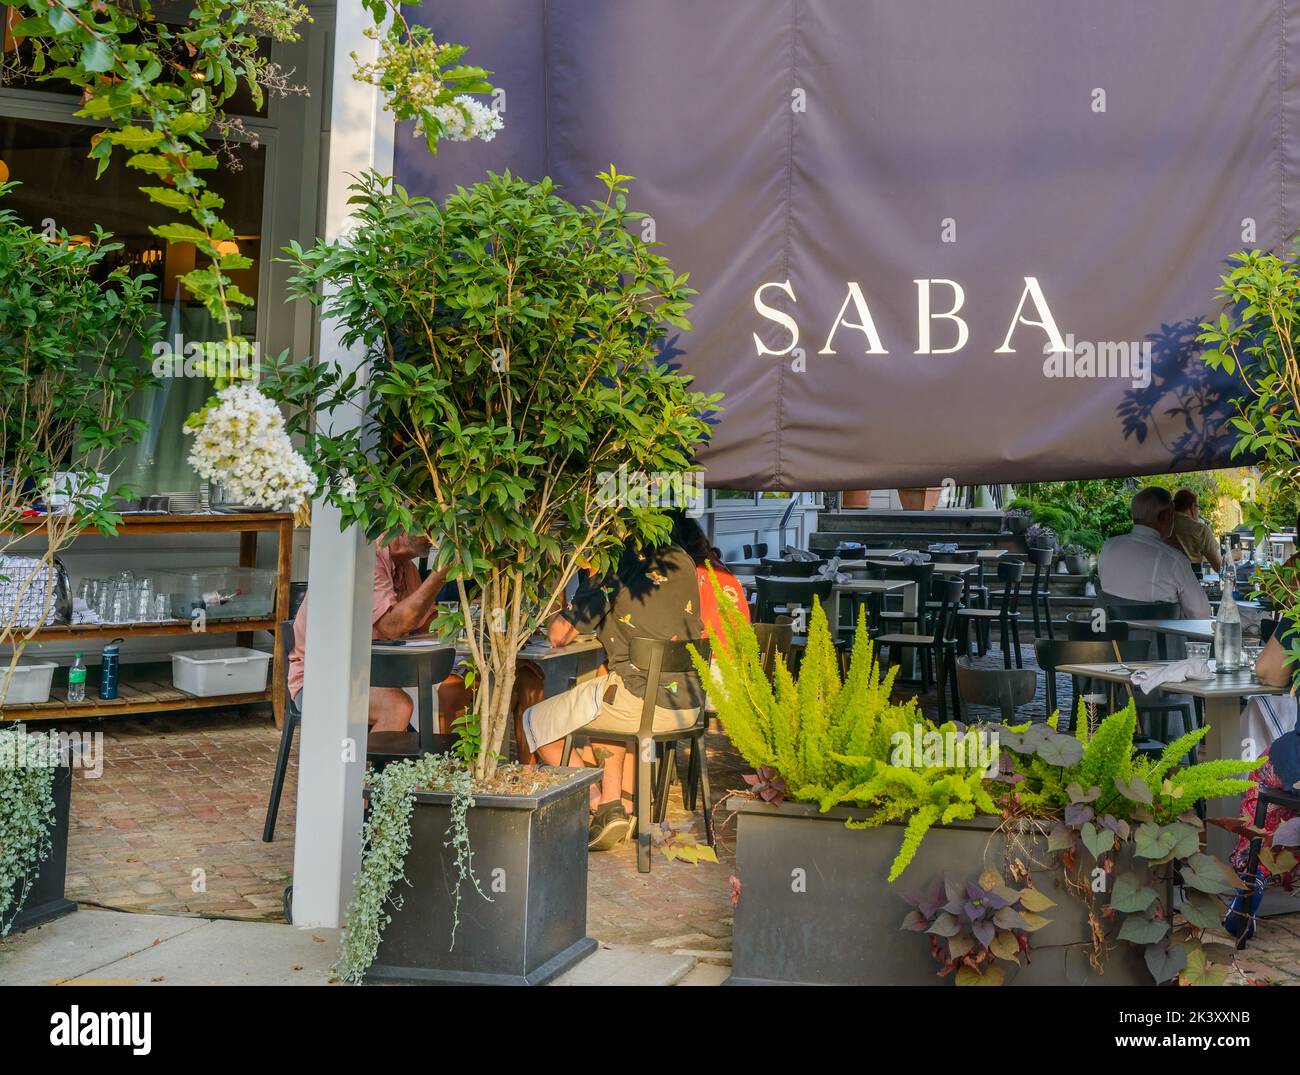 NEW ORLEANS, LA, USA - SEPTEMBER 25, 2022: Shaded outdoor dining area for Saba Restaurant on Magazine Street in Uptown New Orleans Stock Photo